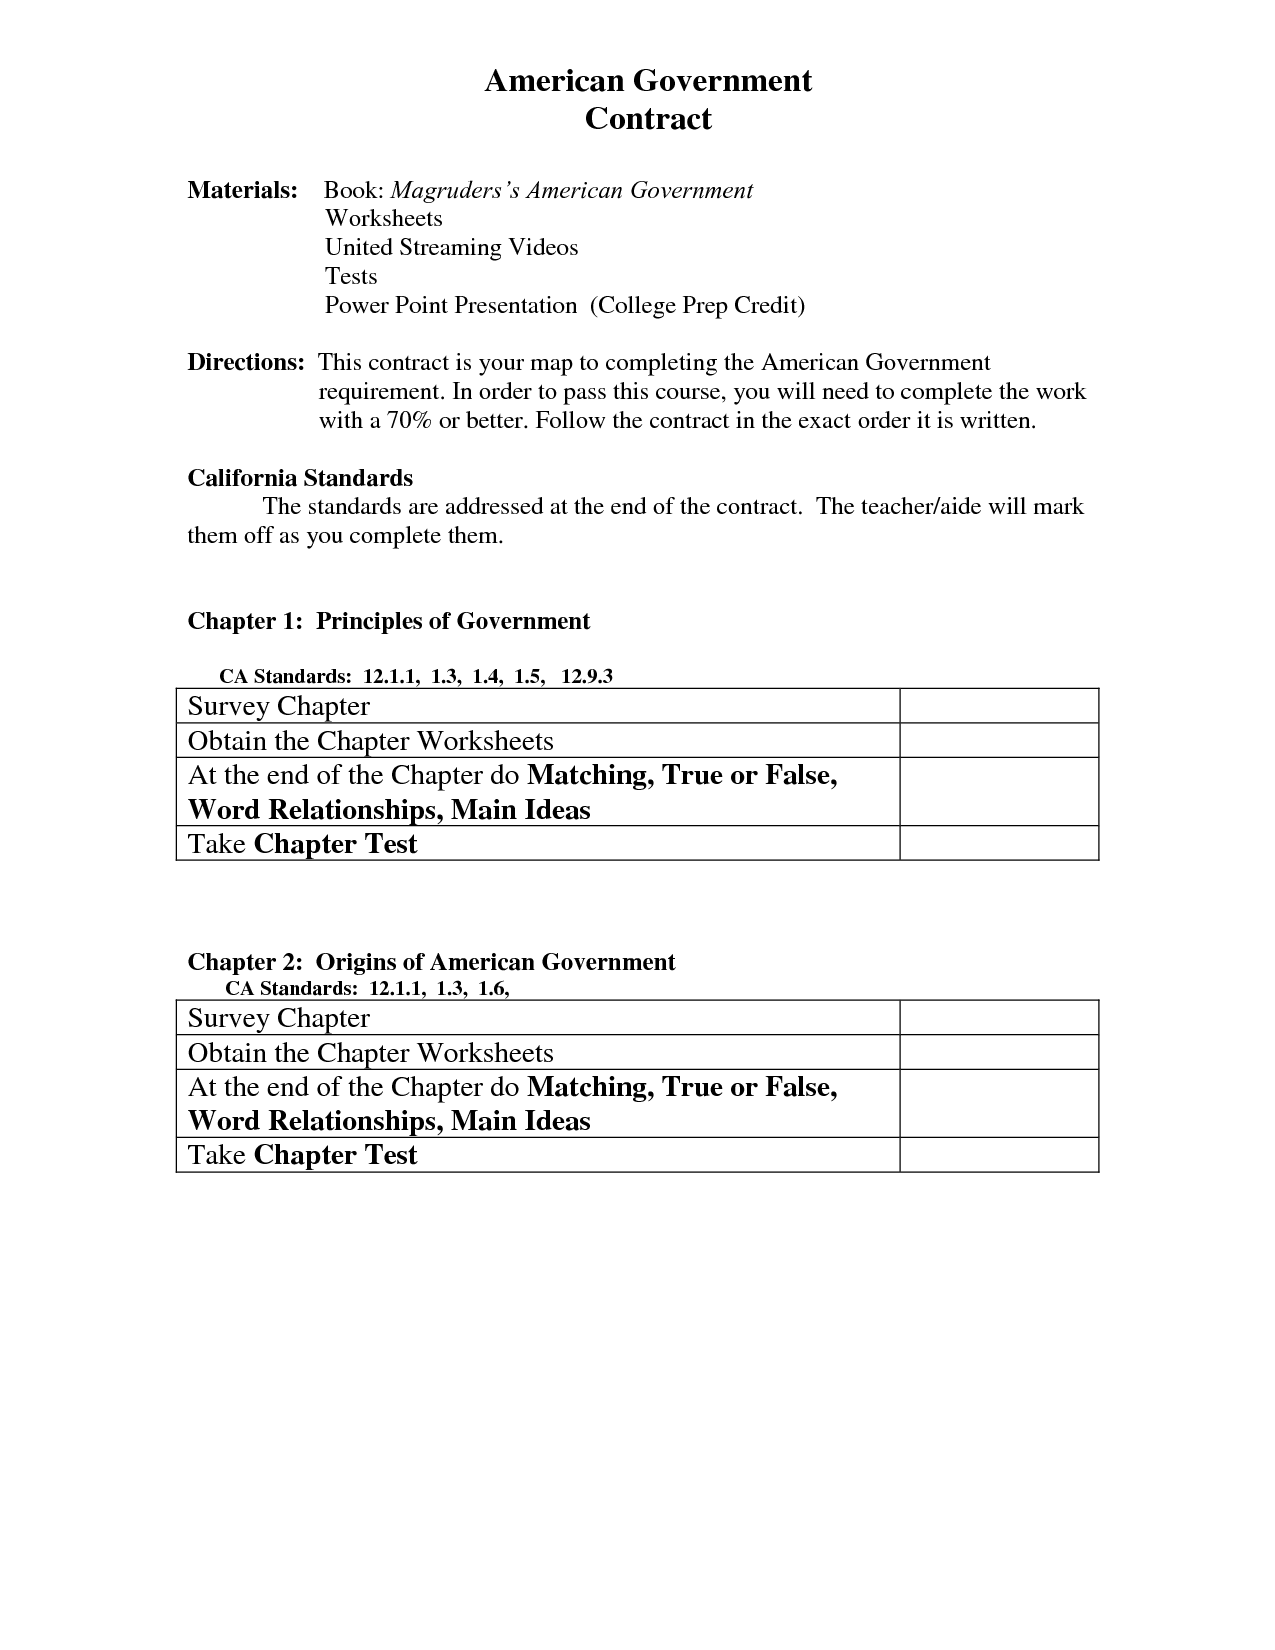 American Government Worksheets Image